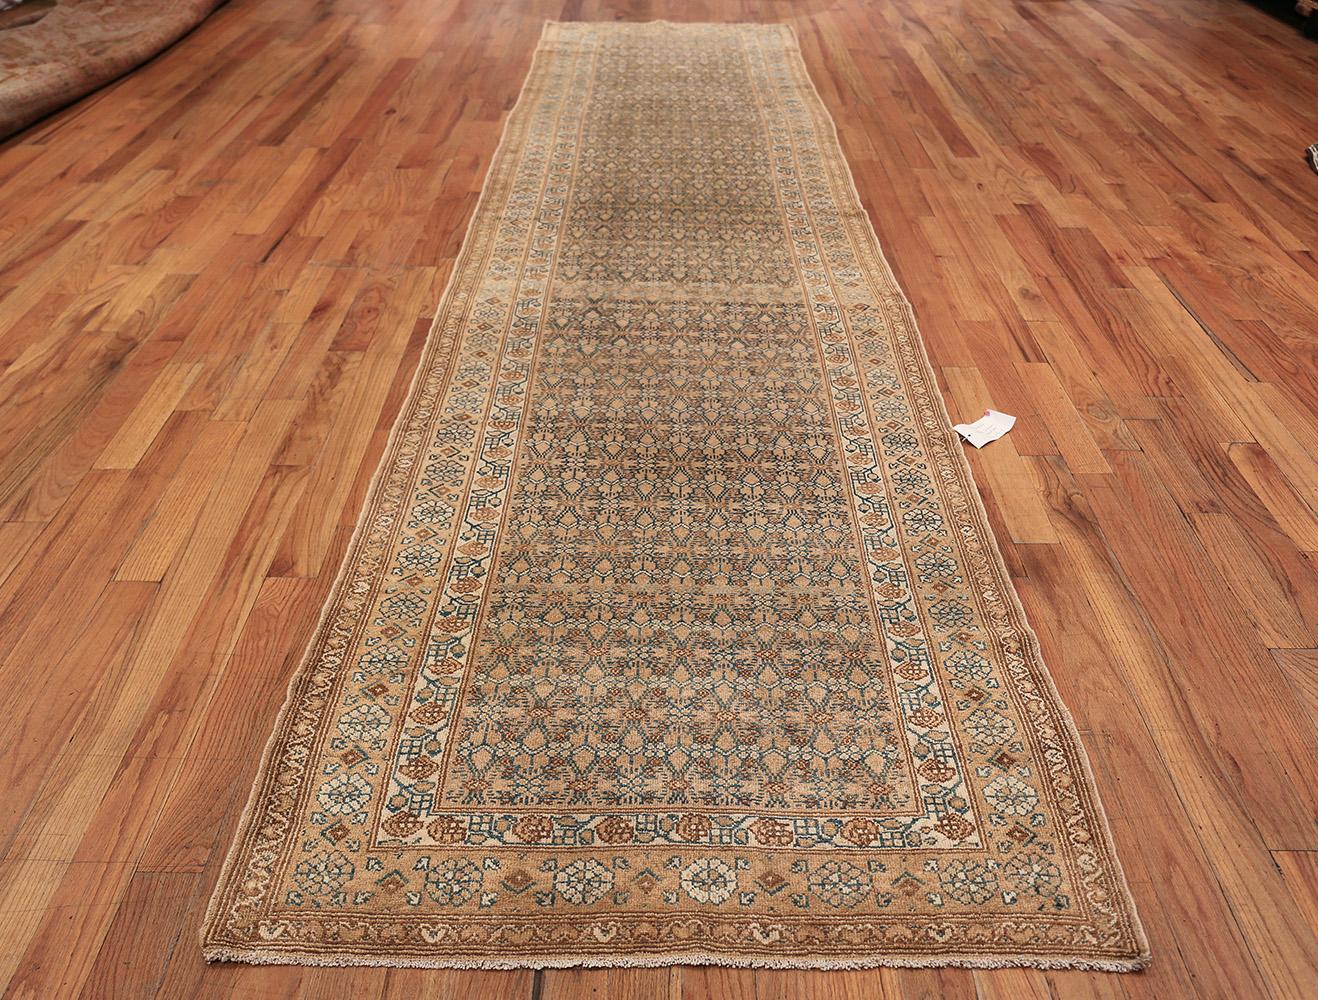 Antique Persian Malayer Runner Rug, Country of Origin: Persia, Circa Date: 1920. Size: 3 ft 7 in x 16 ft (1.09 m x 4.88 m)

This Persian rug is rendered in warm orange hues and complemented by deep blue-black line-work, depicting a repeating pattern